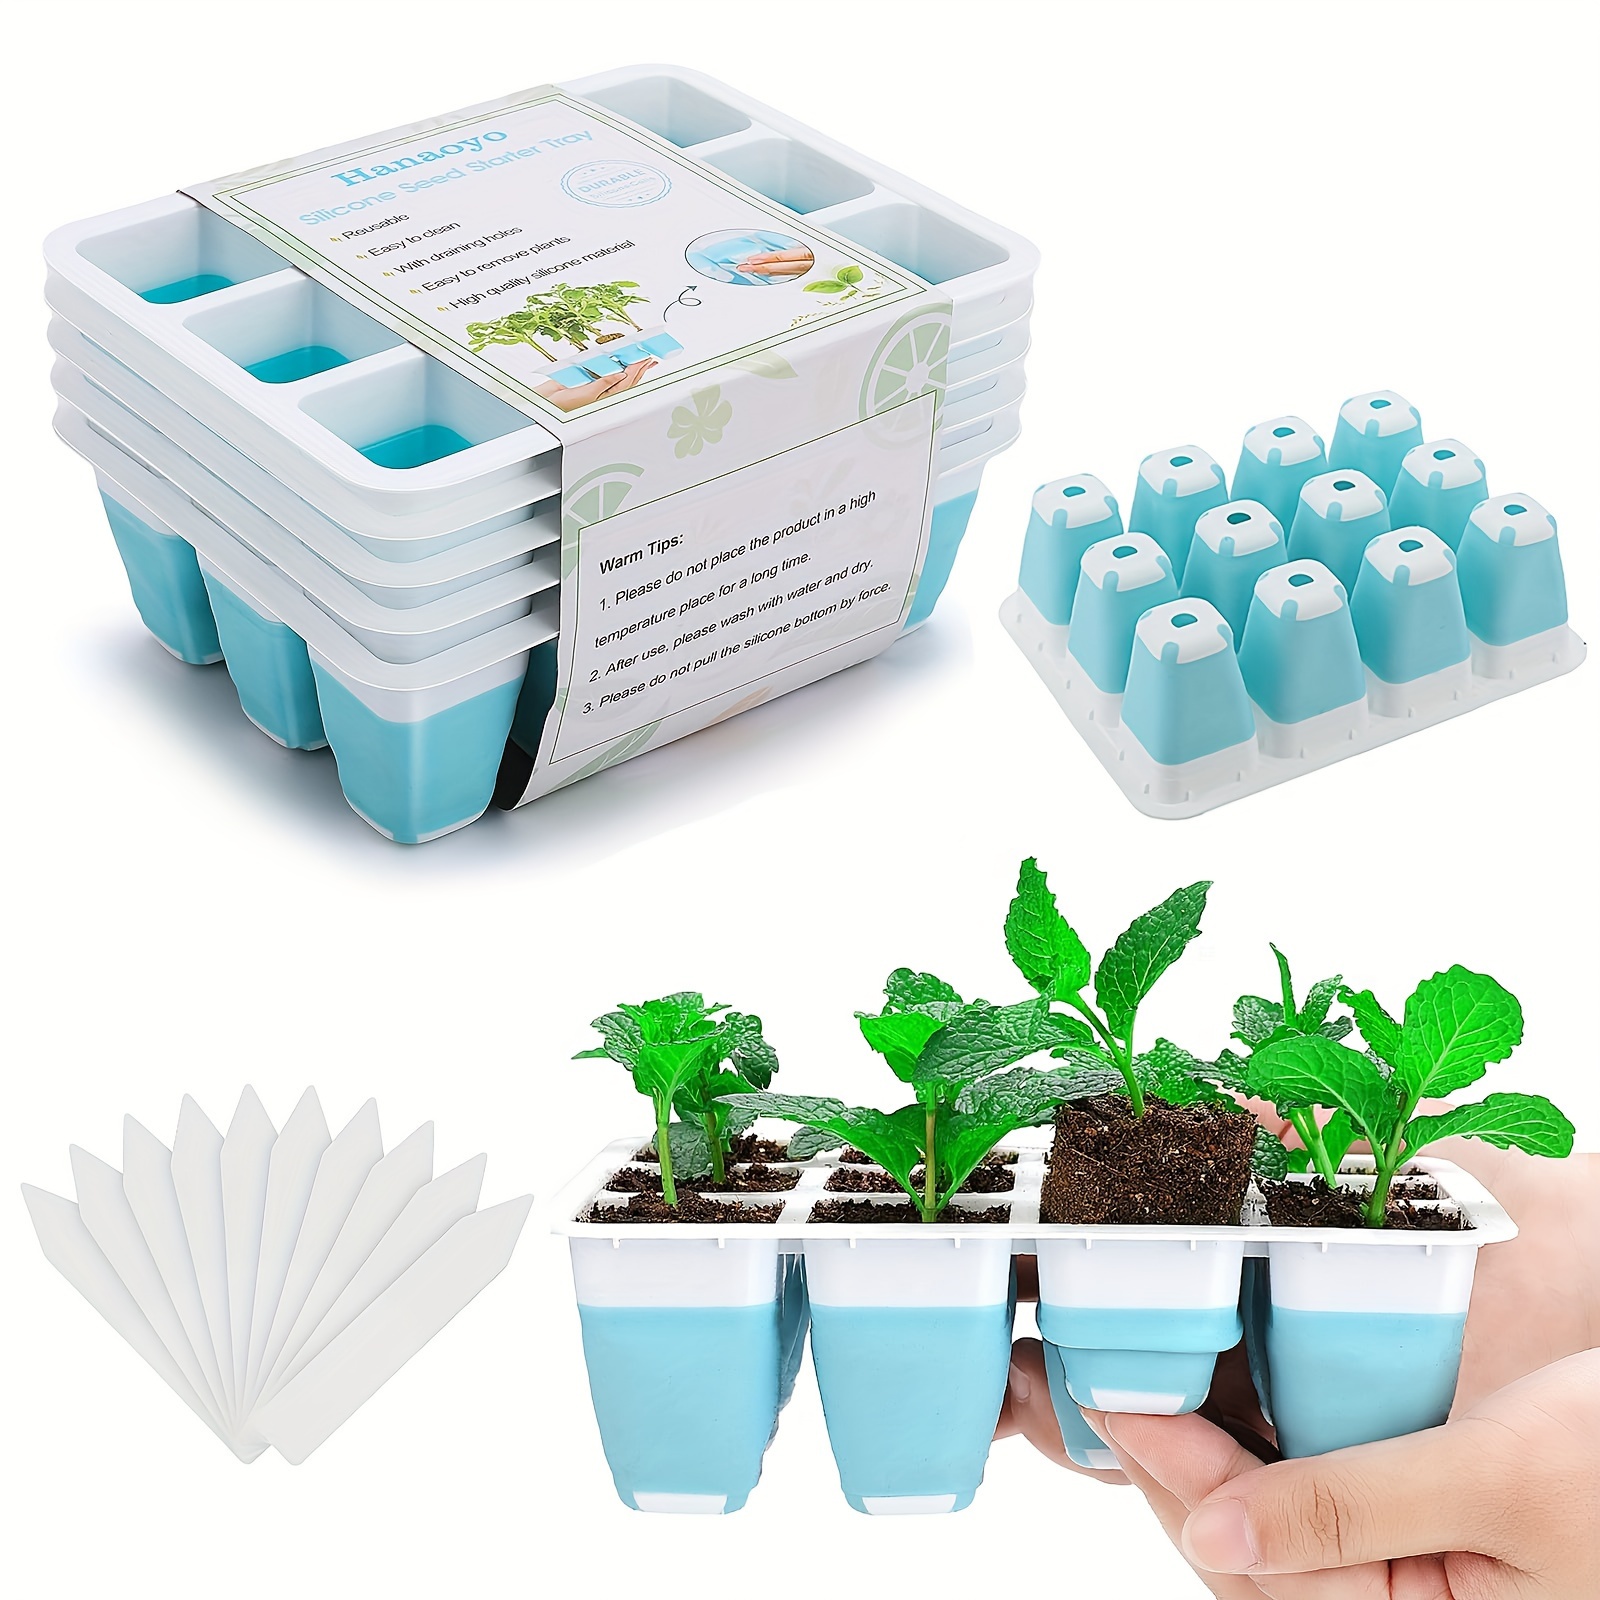 

1pc/5pcs/10pcs Reusable Seed Starter Tray, Seed Starter Kit With Flexible Pop-out Cells, Seedling Starter Trays For Seed Starter, Indoor Greenhouse Seeding Planting Growing